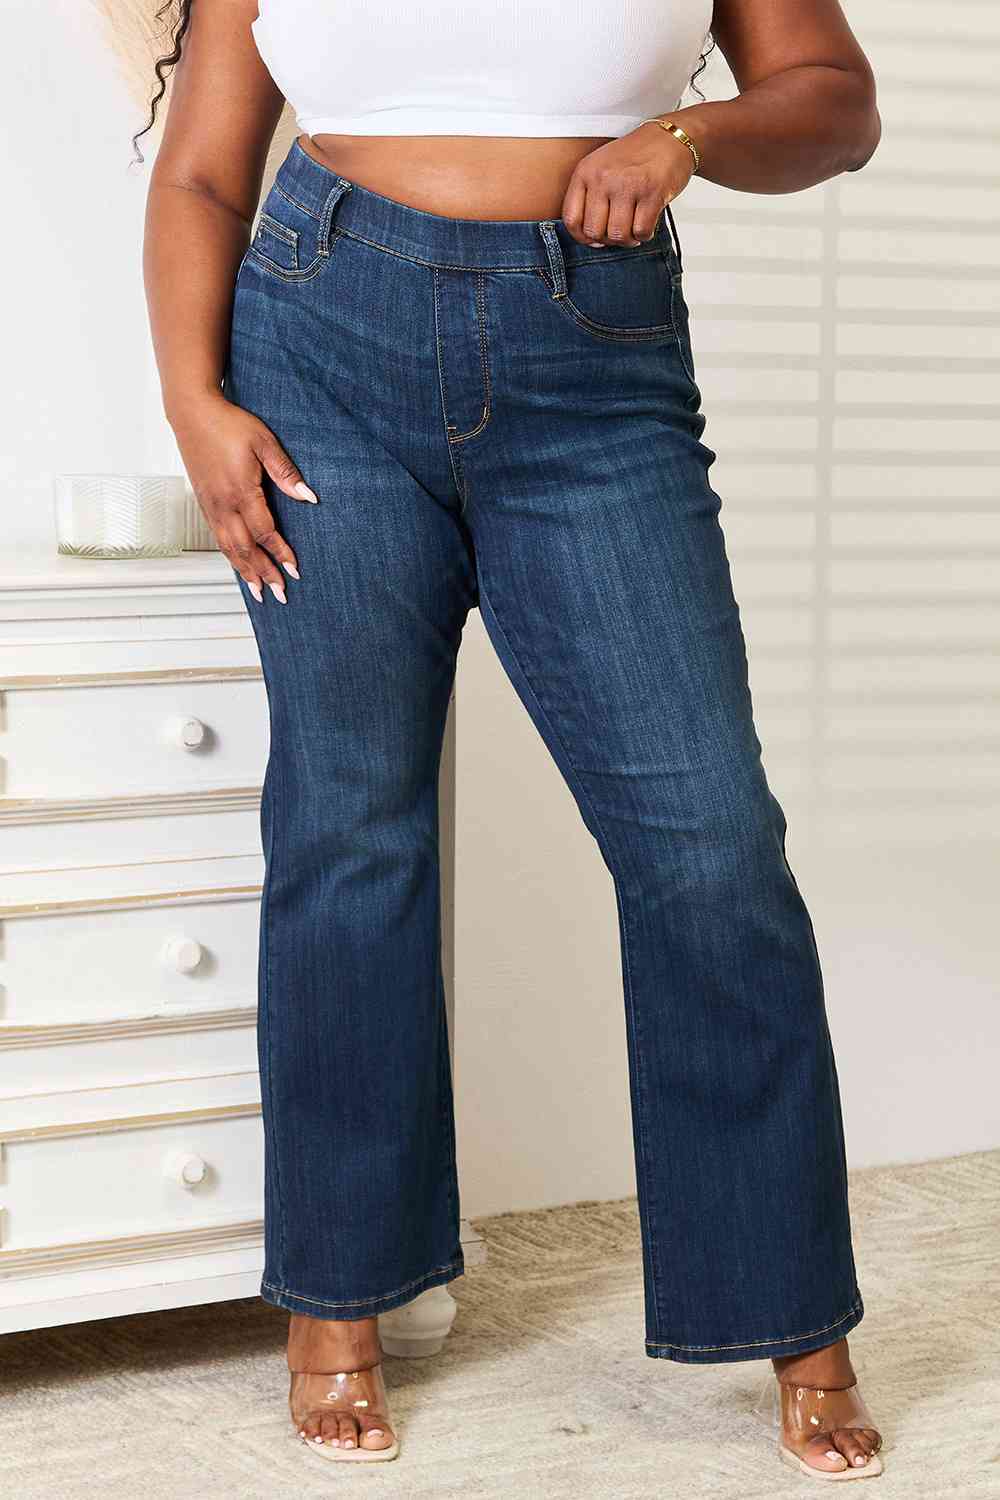 Judy Blue Full Size Elastic Waistband Slim Bootcut Jeans - The Teal Antler Boutique